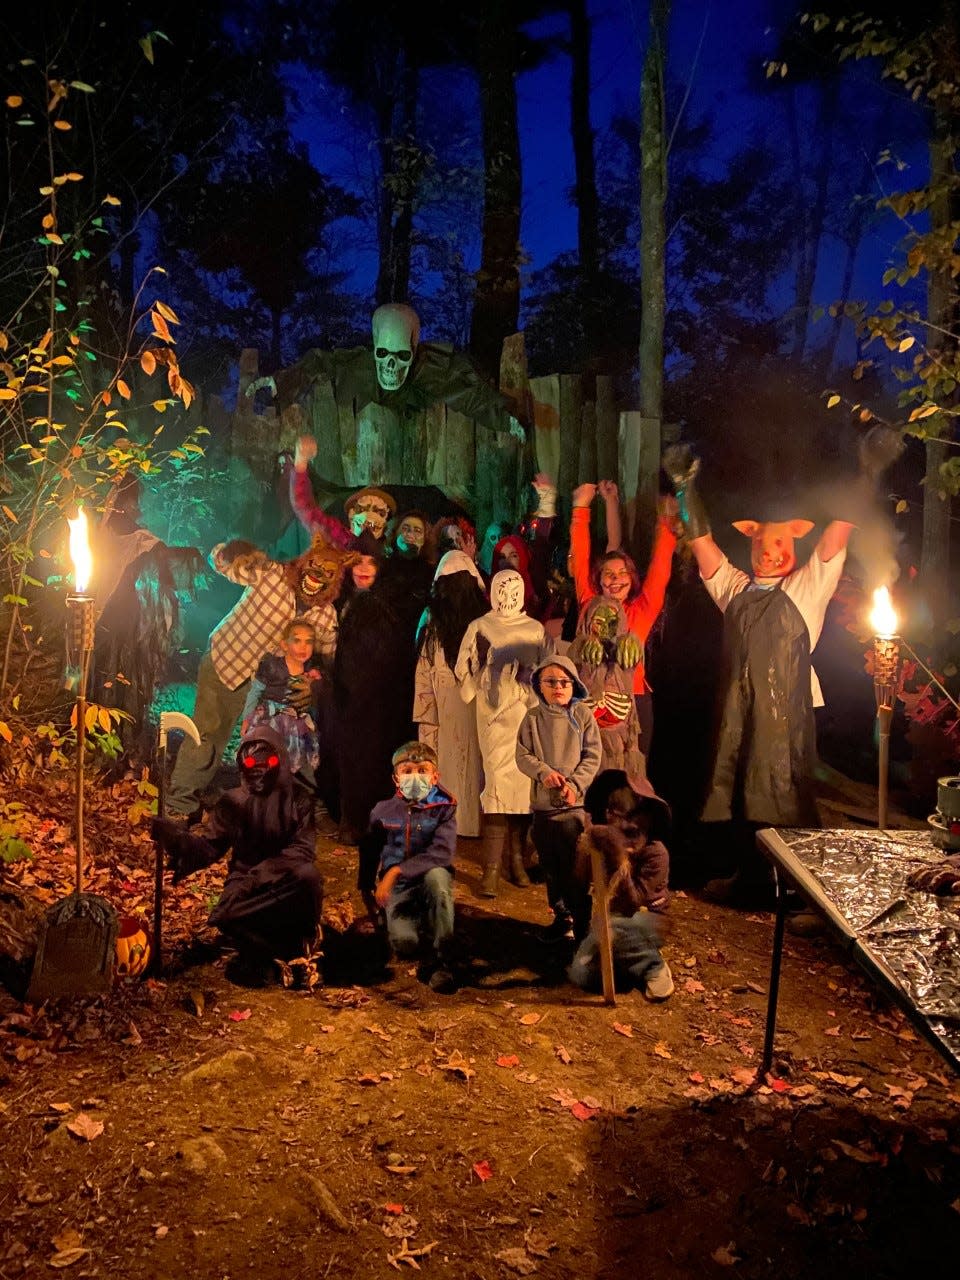 Jacob Hartford and a few of his "friends" are ready to welcome you to visit the Boo Crew for Halloween at the Aurora Woods haunted walk at 6 Keefe Road in Barrington.